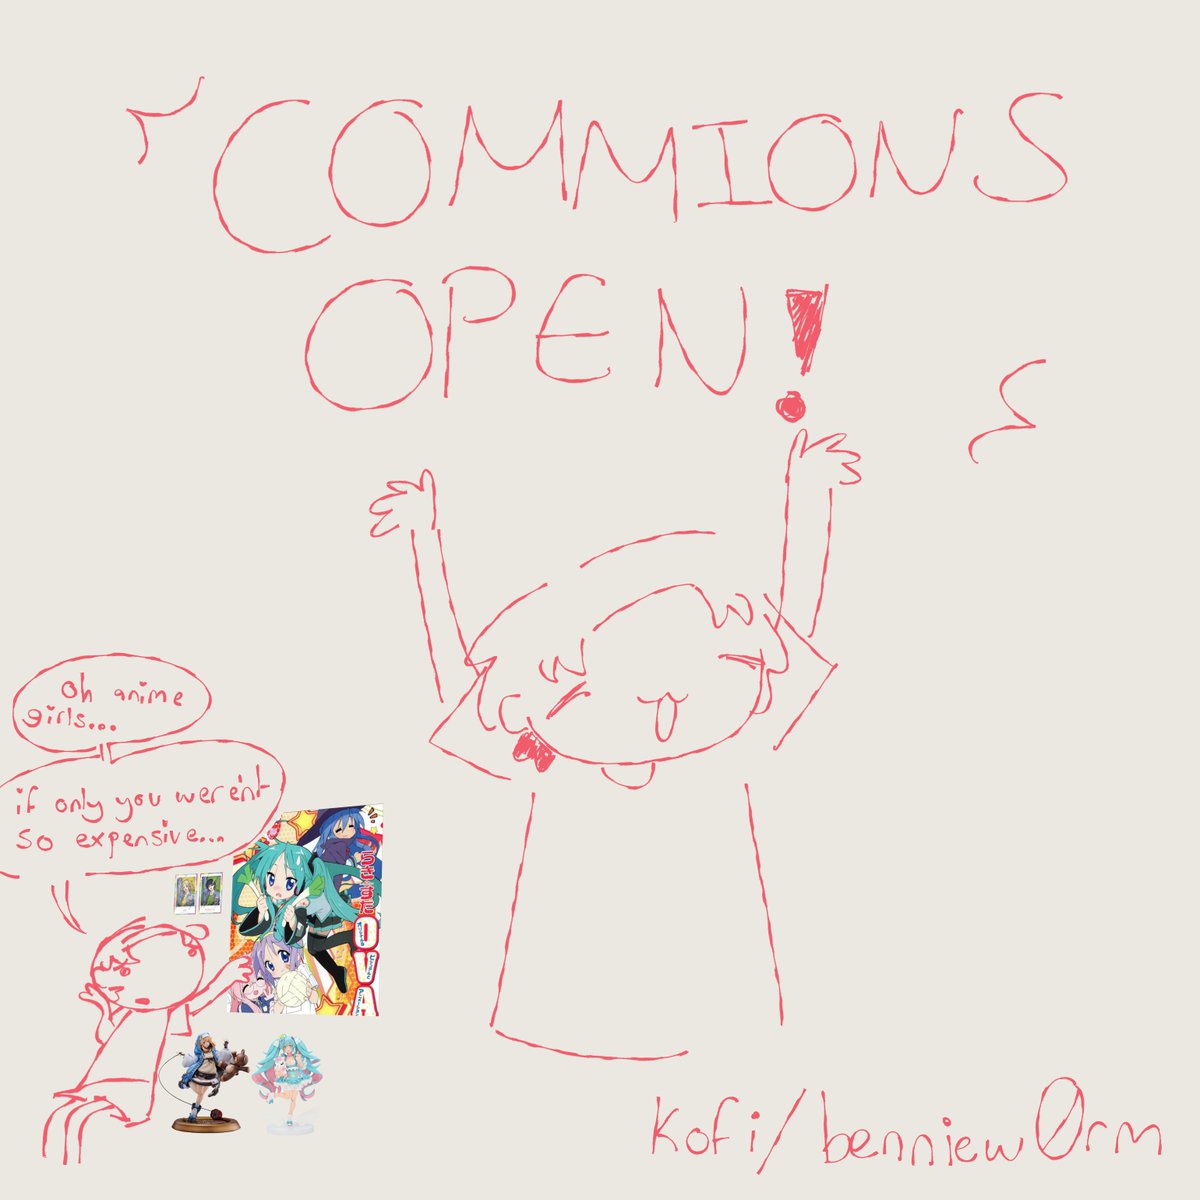 hello!! i hope you all dont mind but im opening commissions!! since its my first time ive only got a few slots but if your interested feel free to check them out ^^ ko-fi.com/benniew0rm